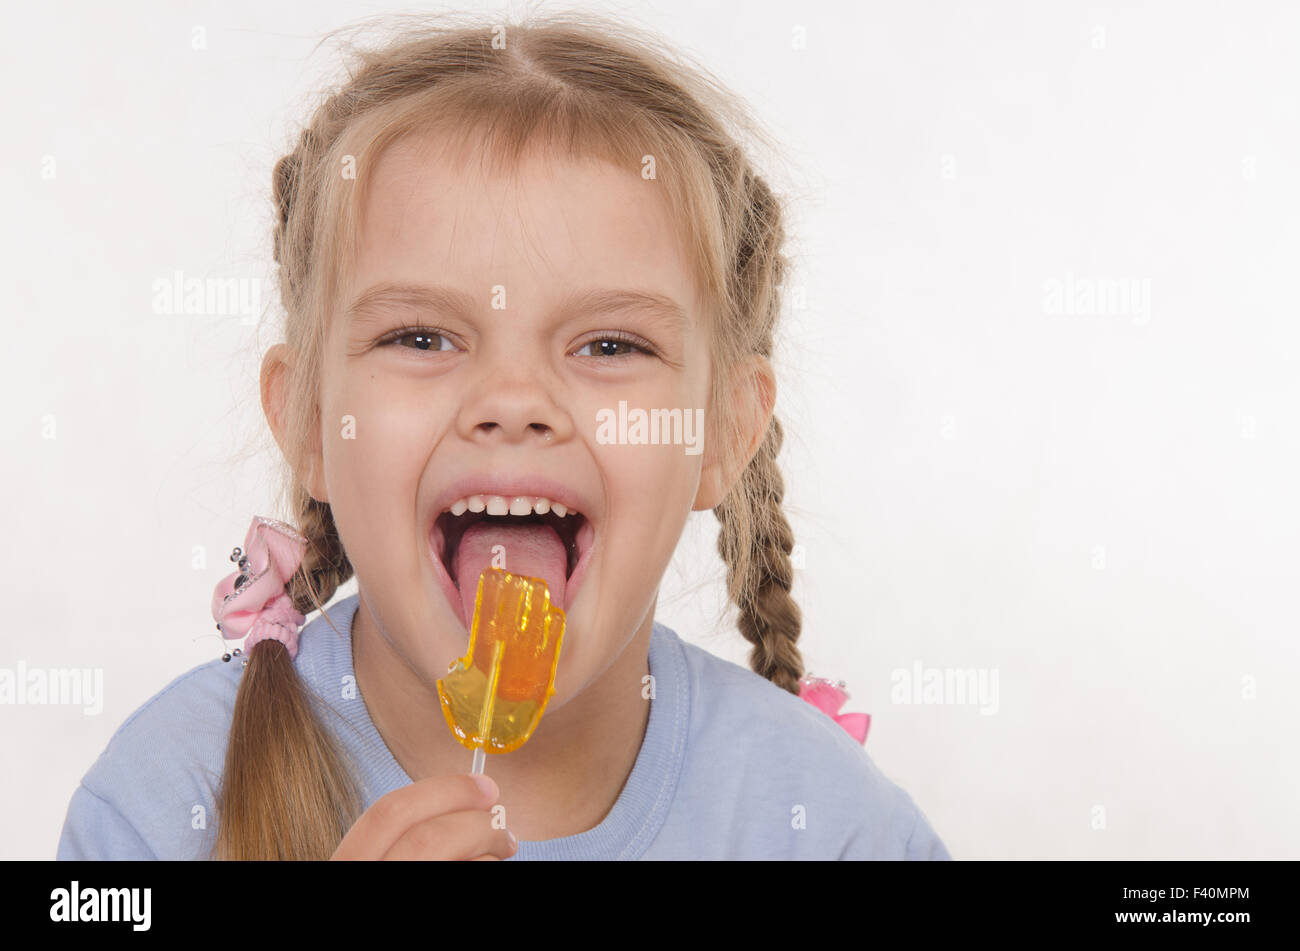 Funny girl licking a lollipop Stock Photo